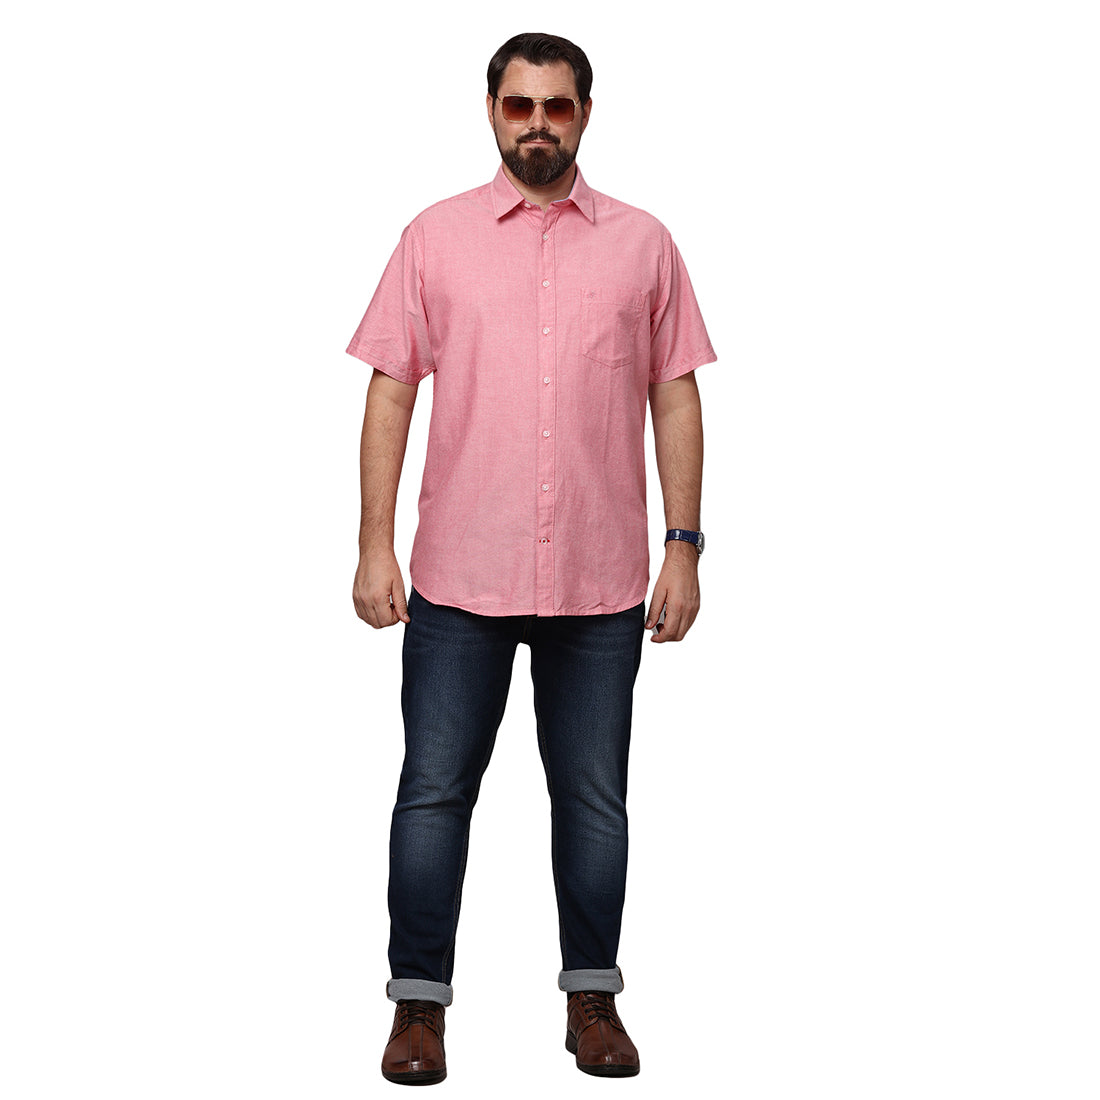 Big & Bold Solid Red Half Sleeves Slim Fit Casual Shirts (Plus Size) - Double Two